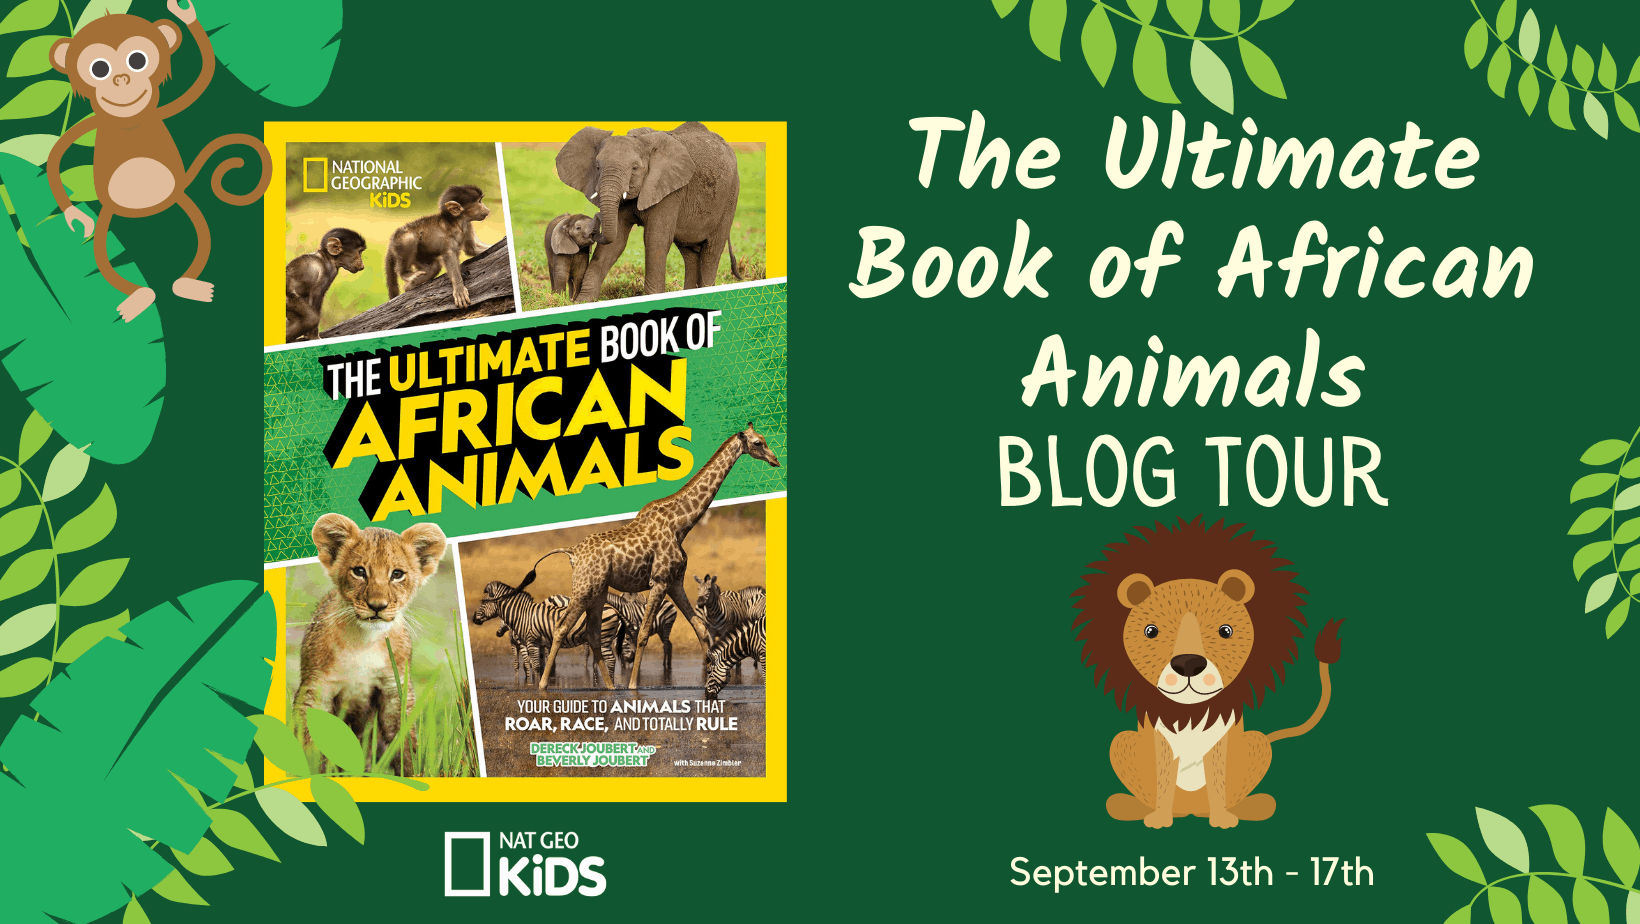 The Ultimate Book of African Animals Blog Tour + Giveaway